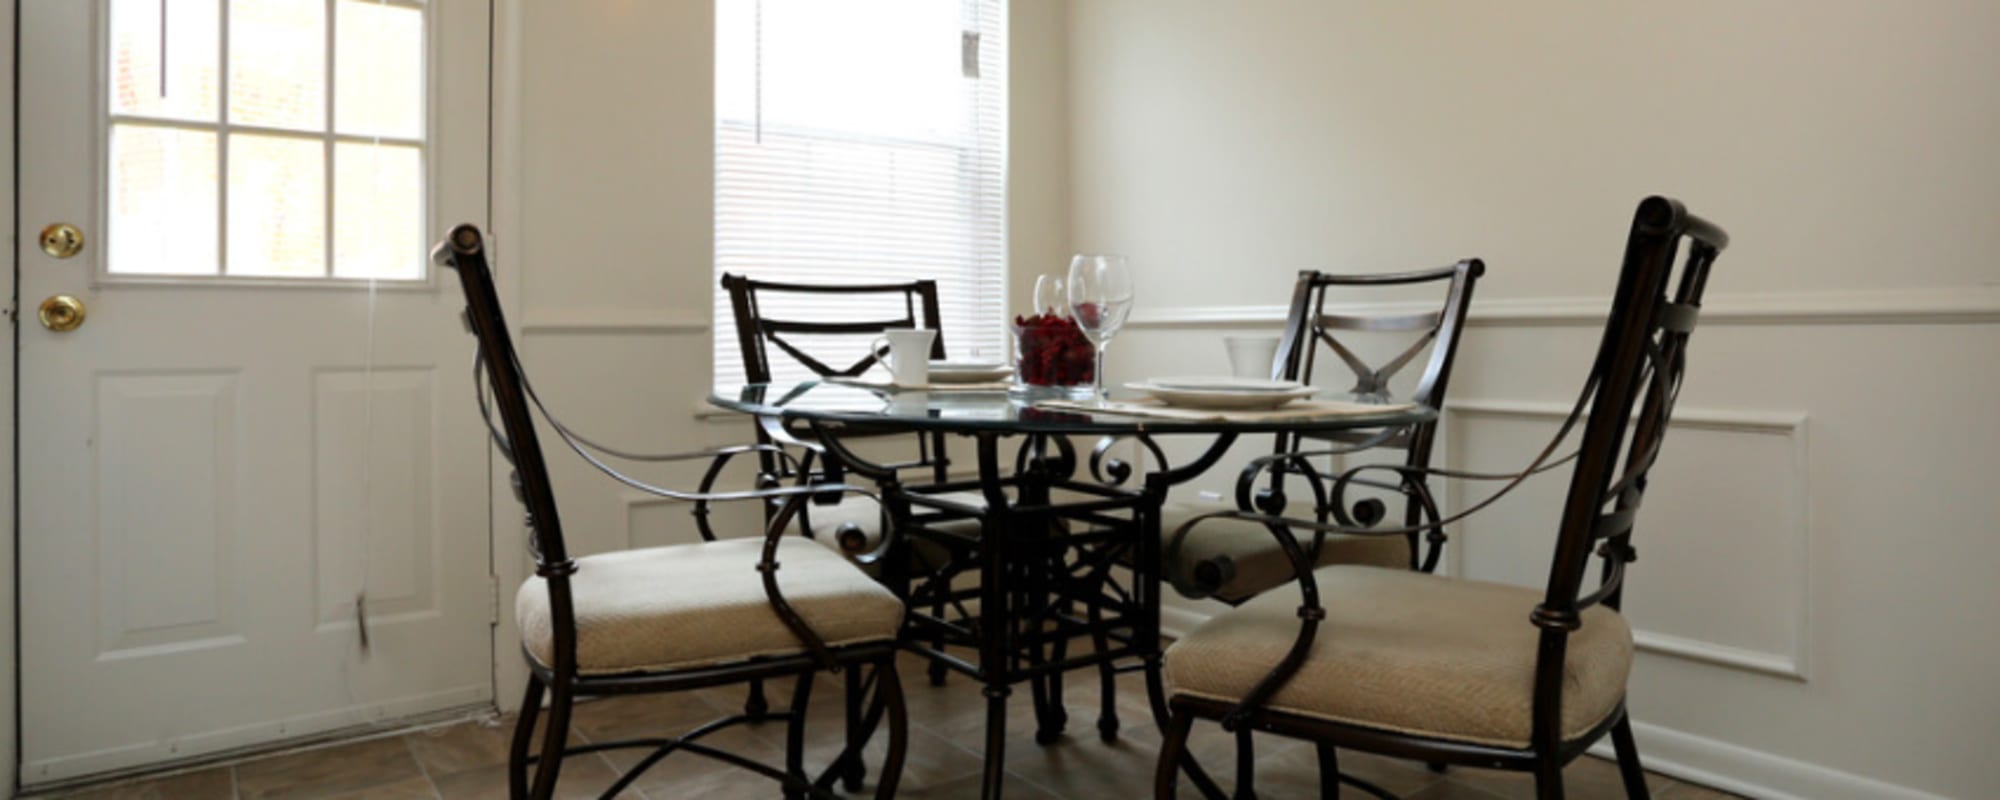 Dining area at Morningside Apartments in Richmond, Virginia